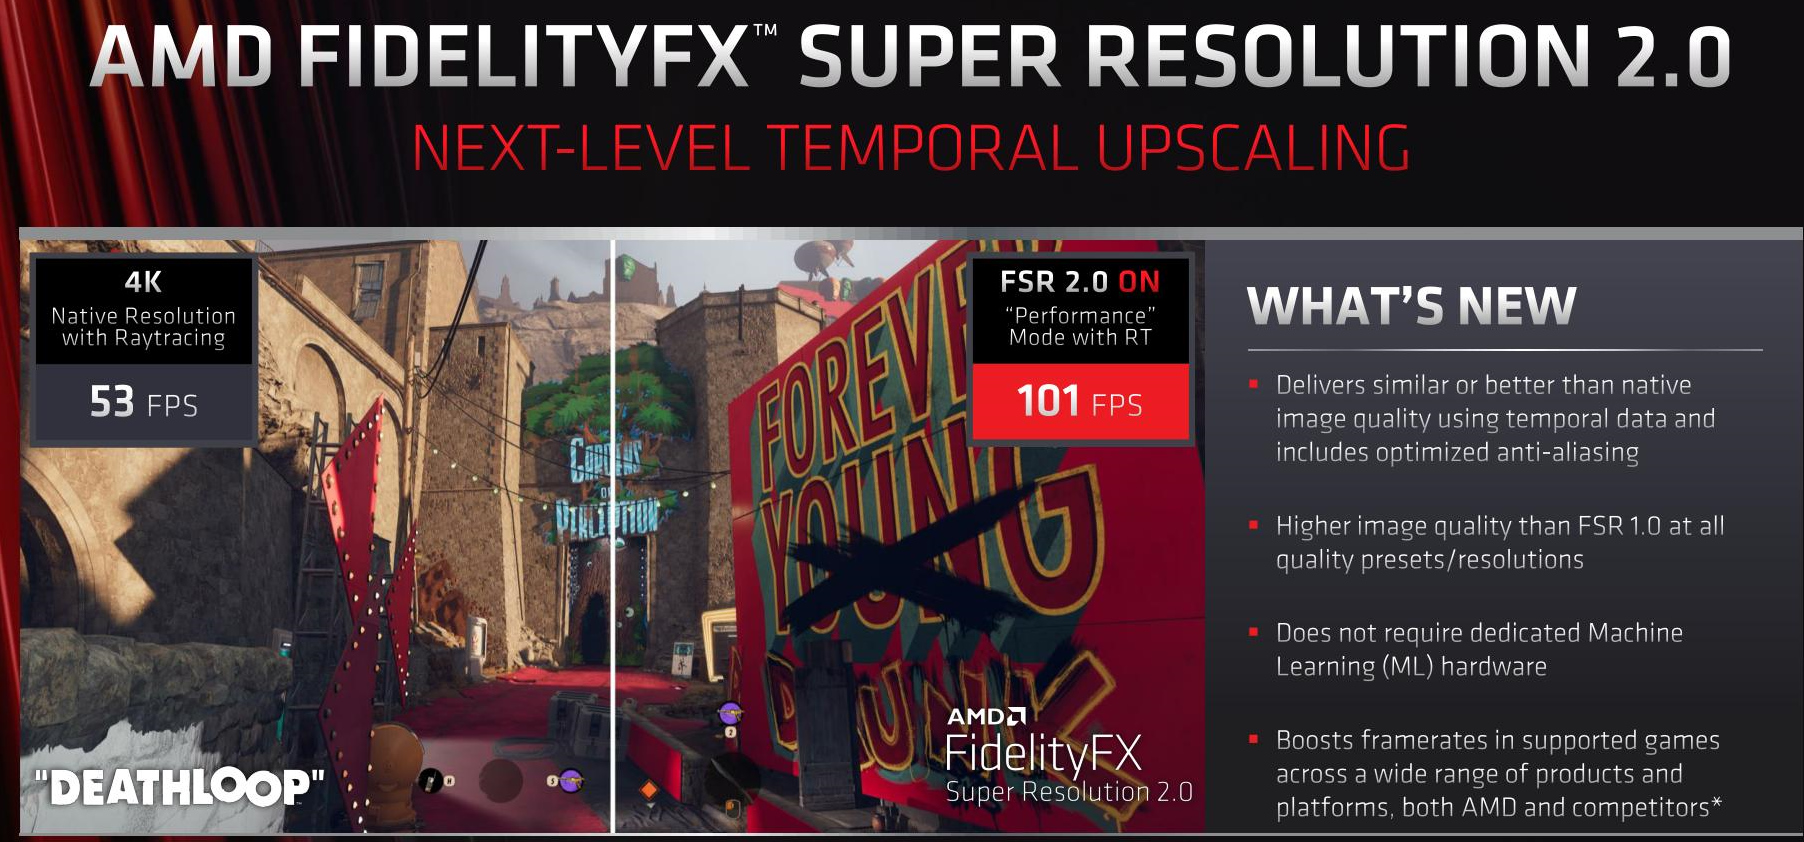 Deathloop: Putting AMD’s FidelityFX Super Resolution 2.0 to The Test Against Nvidia’s DLSS